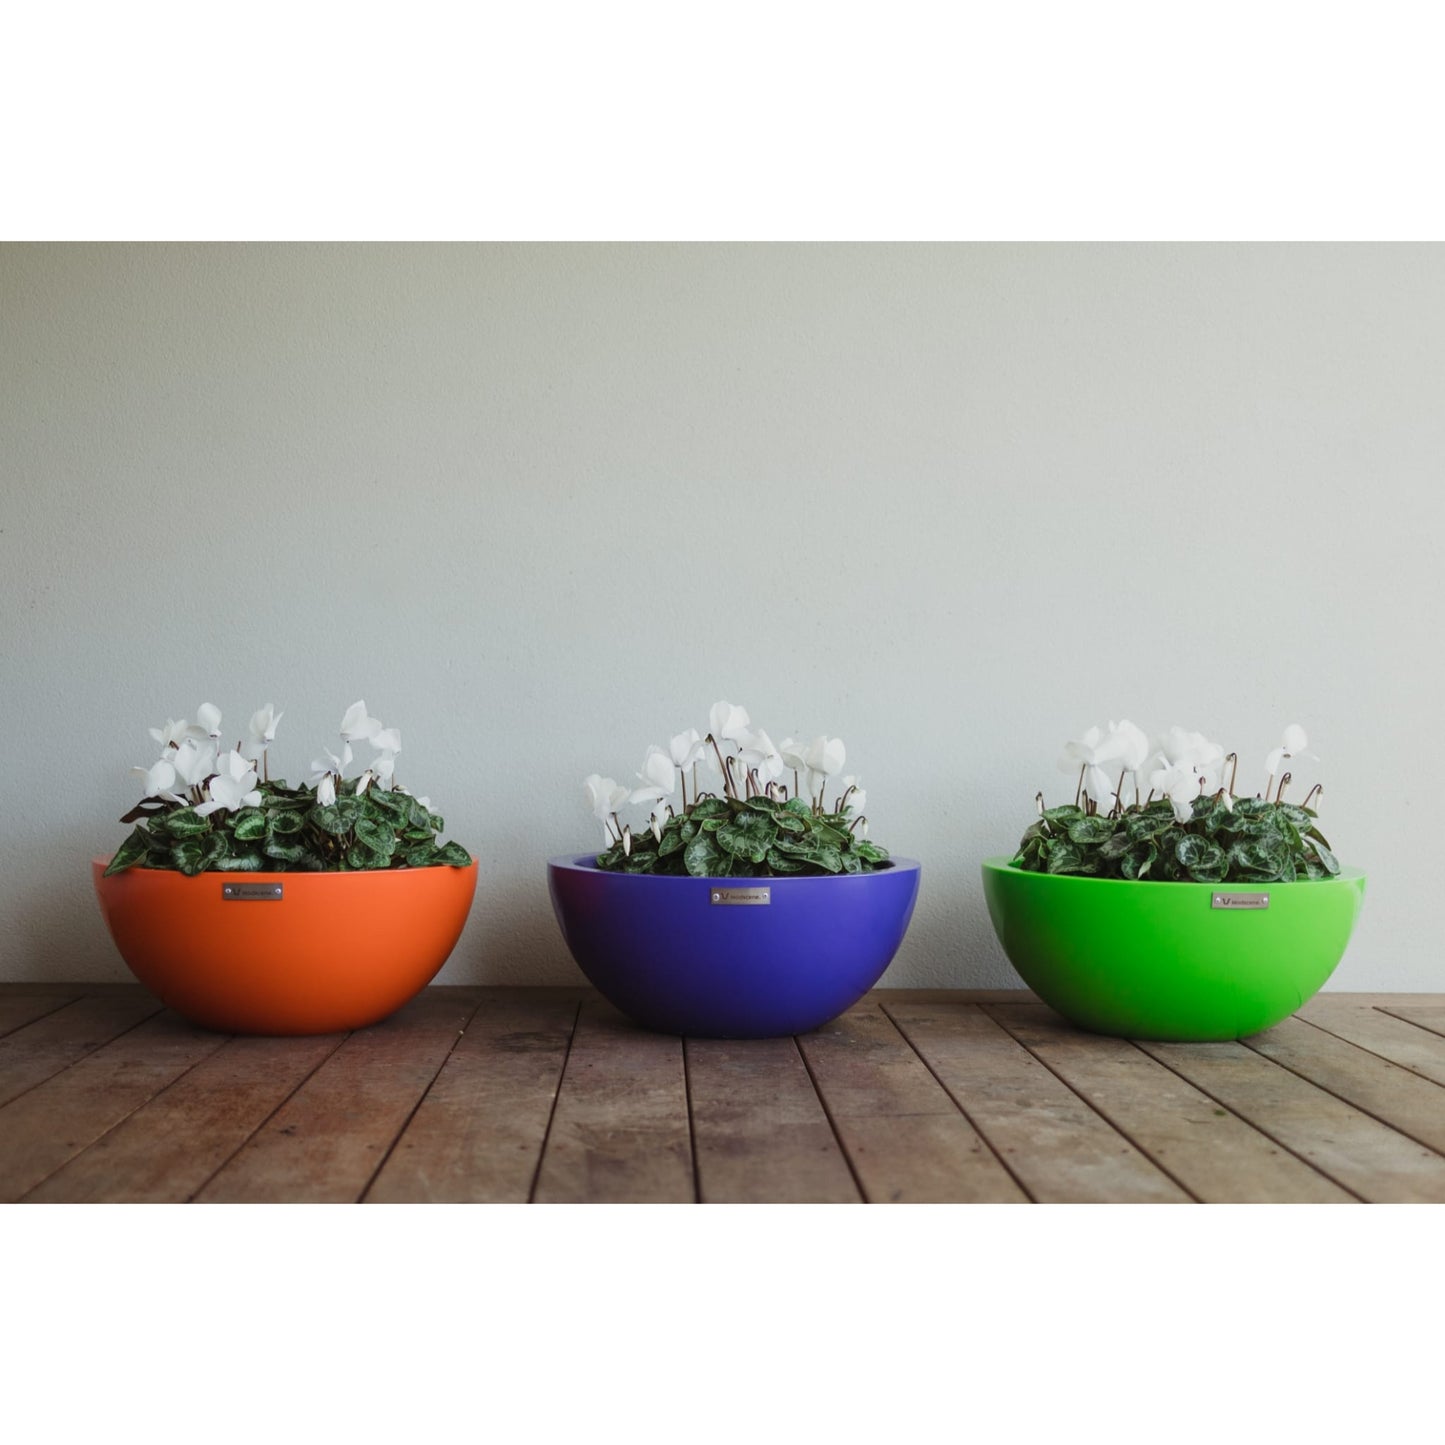 Colourful planter bowls by Modscene sitting on a deck.